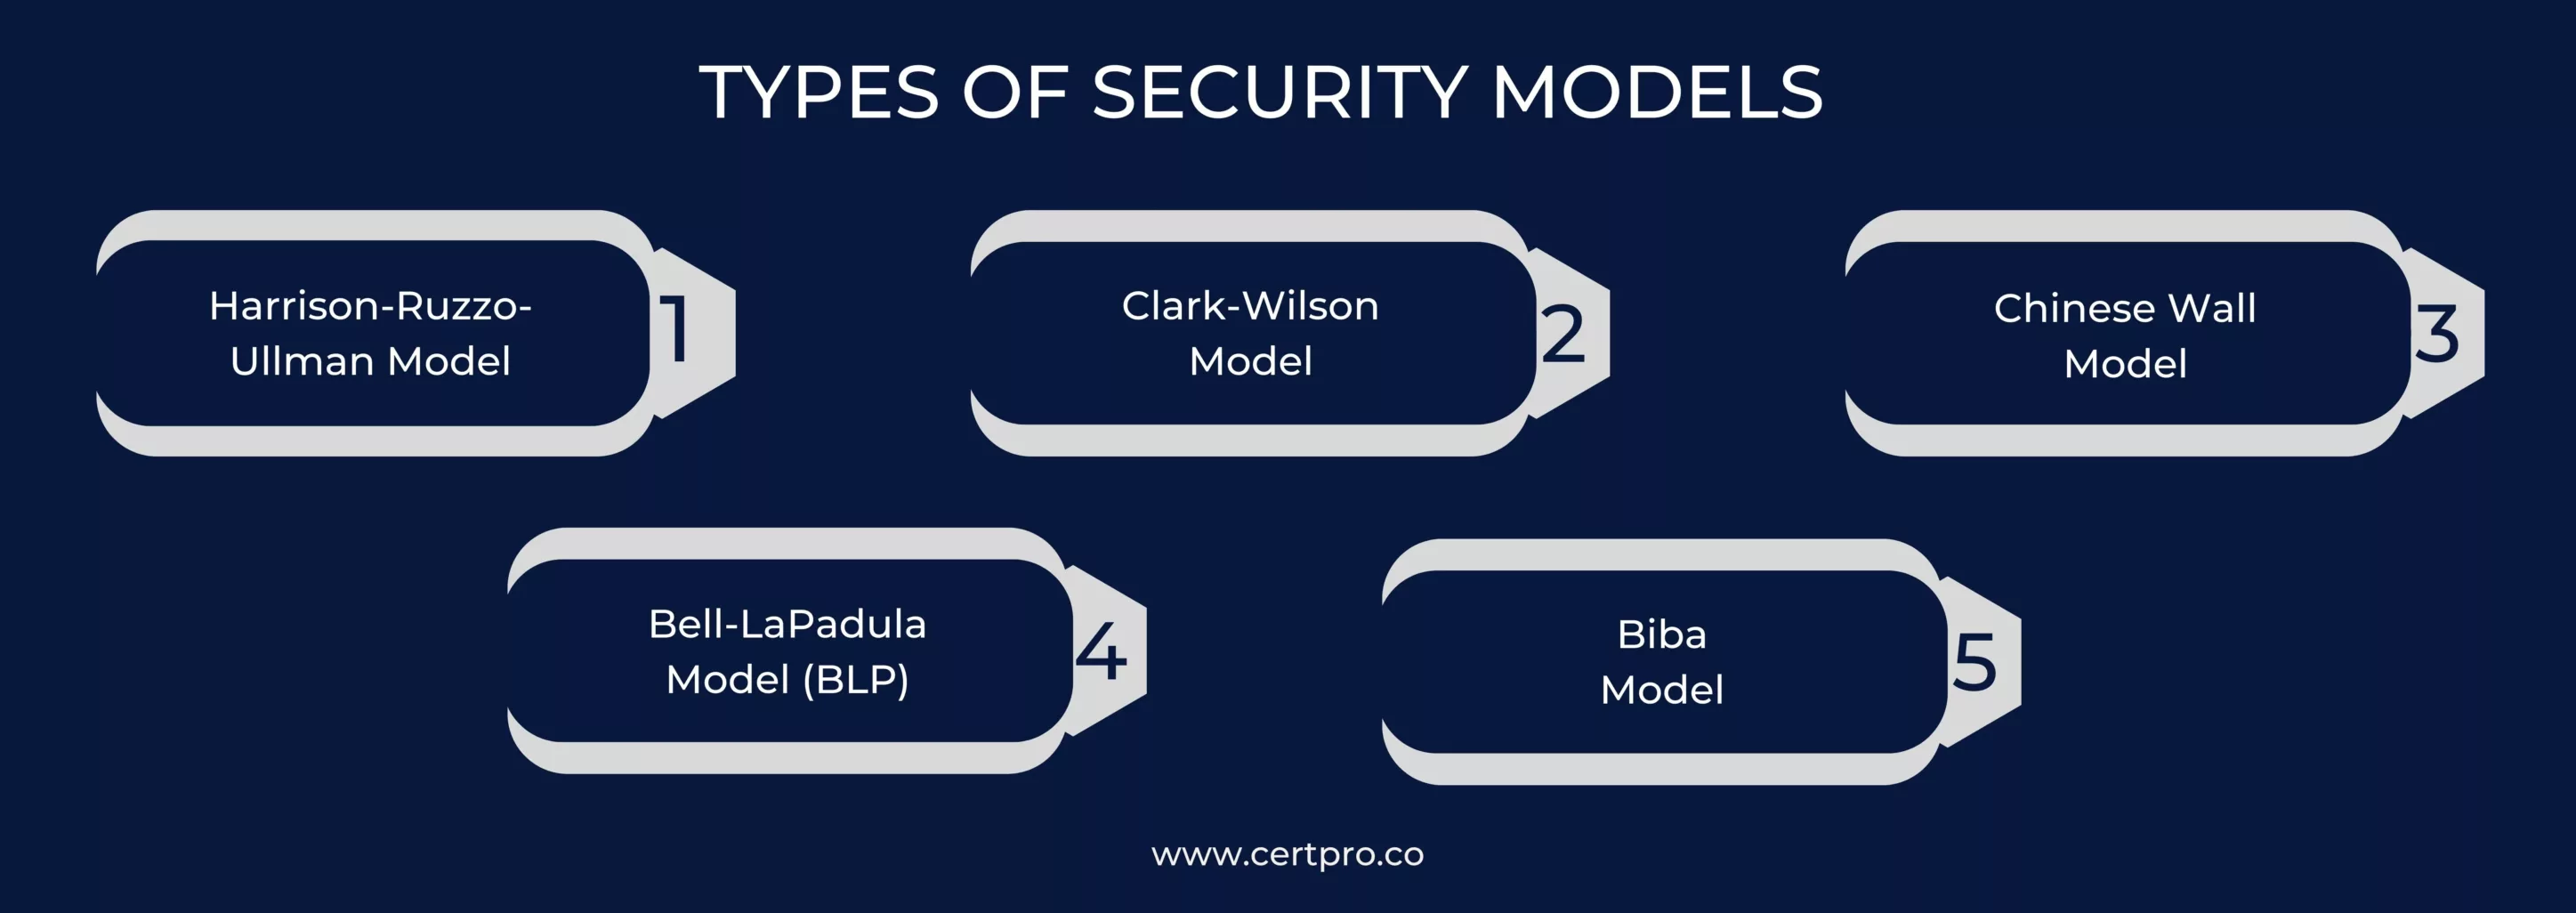 TYPES OF SECURITY MODELS